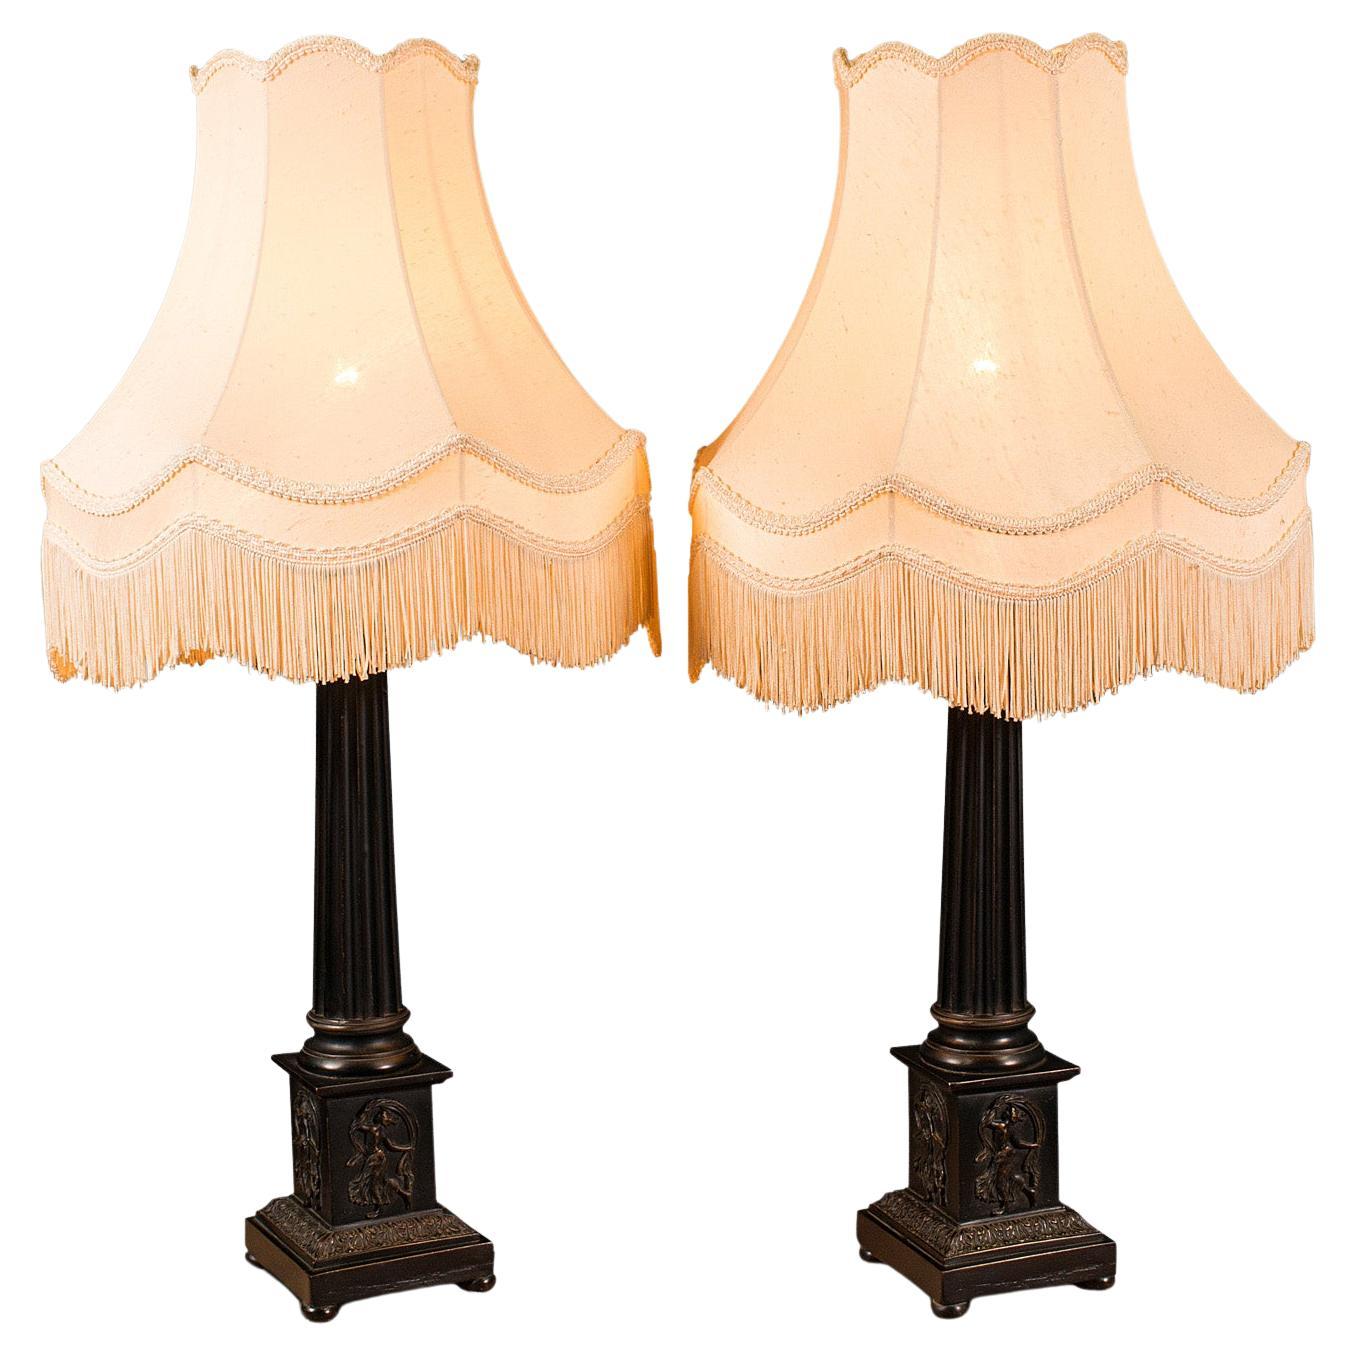 Pair of Vintage Corinthian Lamps, English, Bronzed, Table Light, Classical Taste For Sale